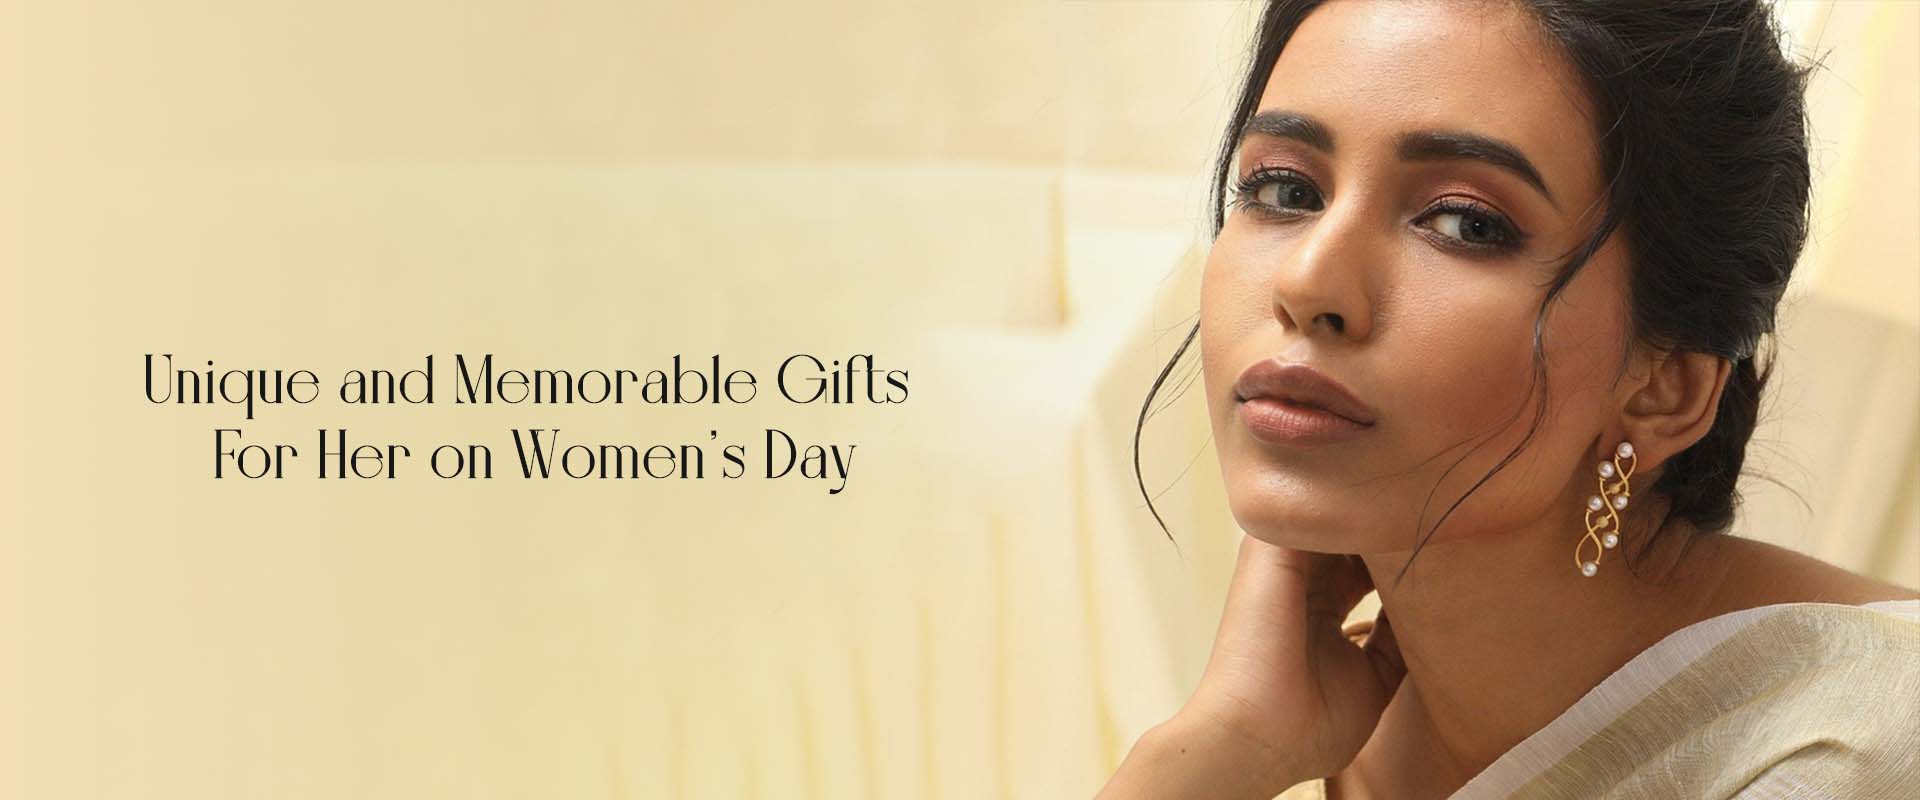 International Women's Day: Make Her Feel Extra Special With These Gifts